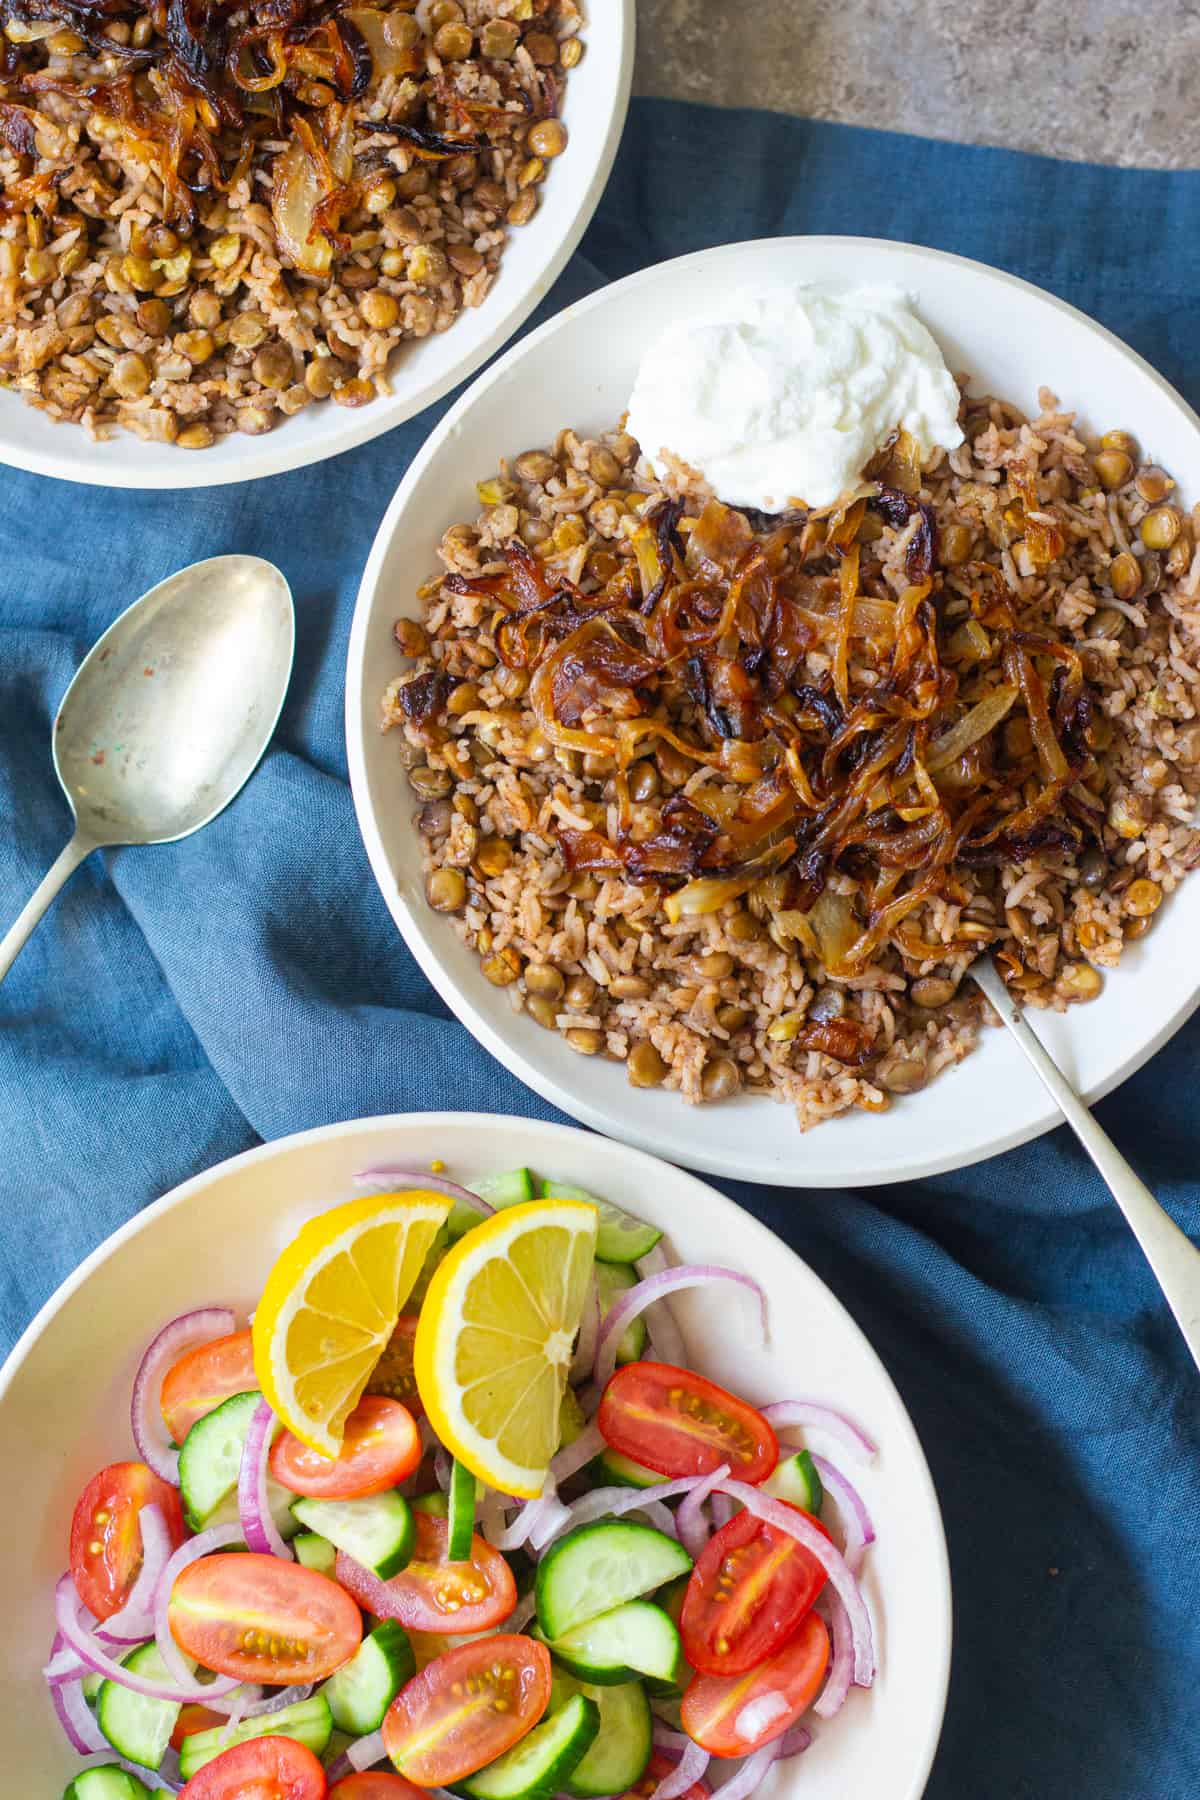 Mujadara is a vegetarian Lebanese lentil and rice dish that's good for the month of Ramadan.